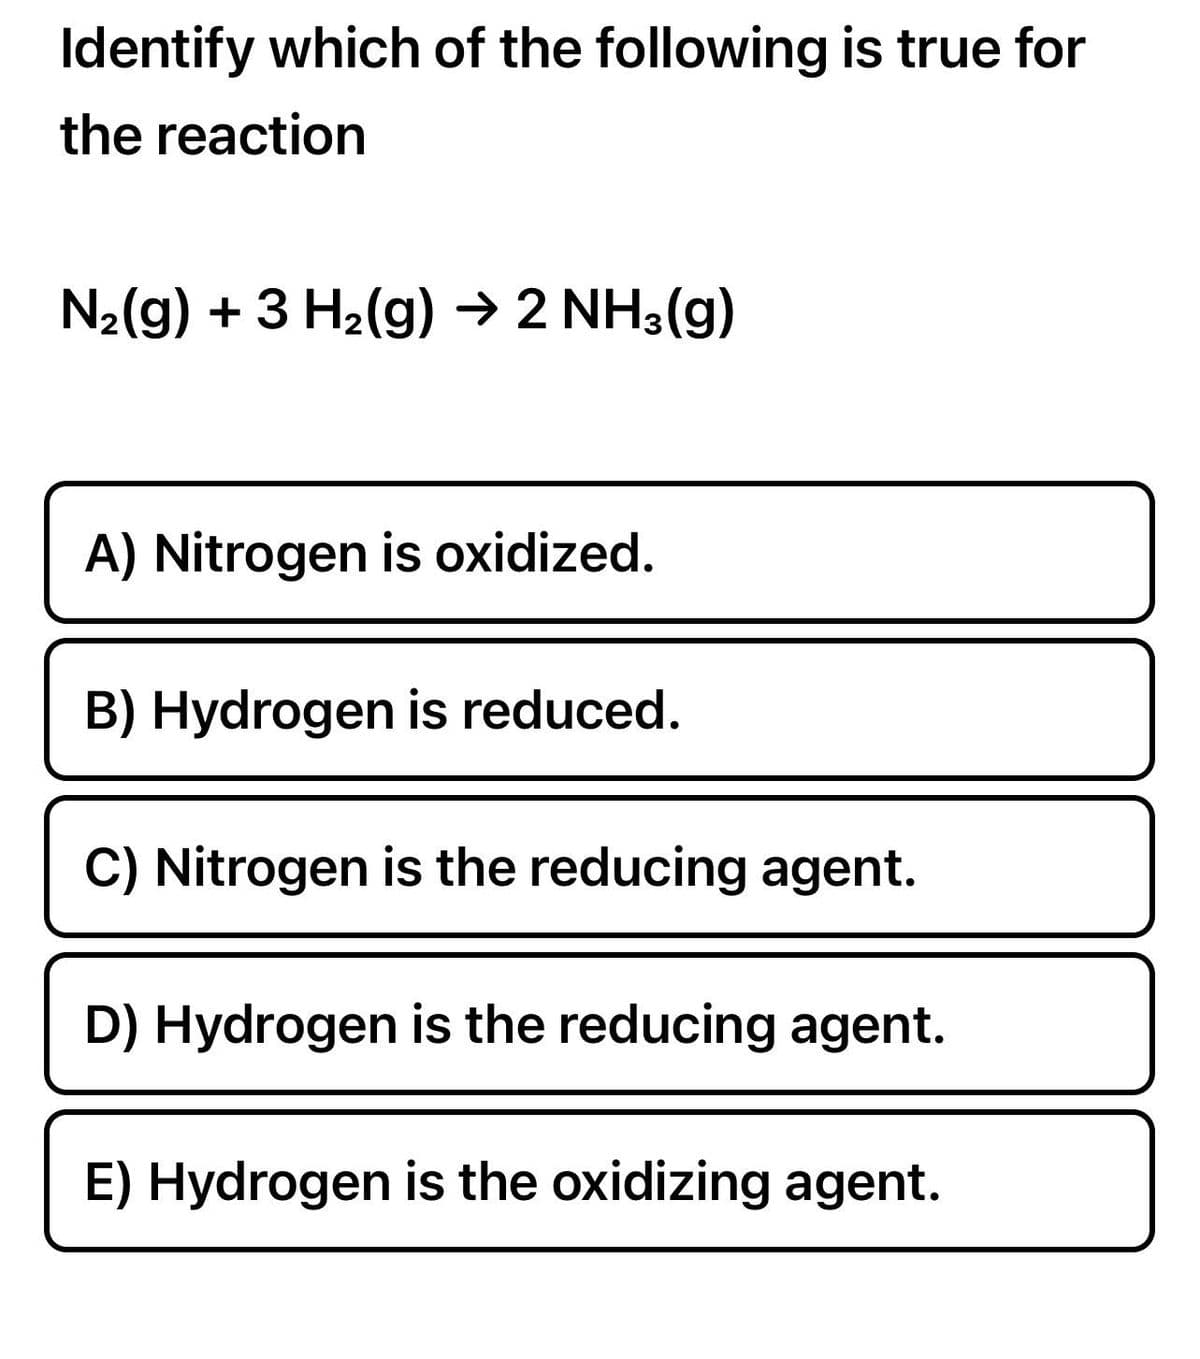 Identify which of the following is true for
the reaction
N₂(g) + 3 H₂(g) → 2 NH3(g)
A) Nitrogen is oxidized.
B) Hydrogen is reduced.
C) Nitrogen is the reducing agent.
D) Hydrogen is the reducing agent.
E) Hydrogen is the oxidizing agent.